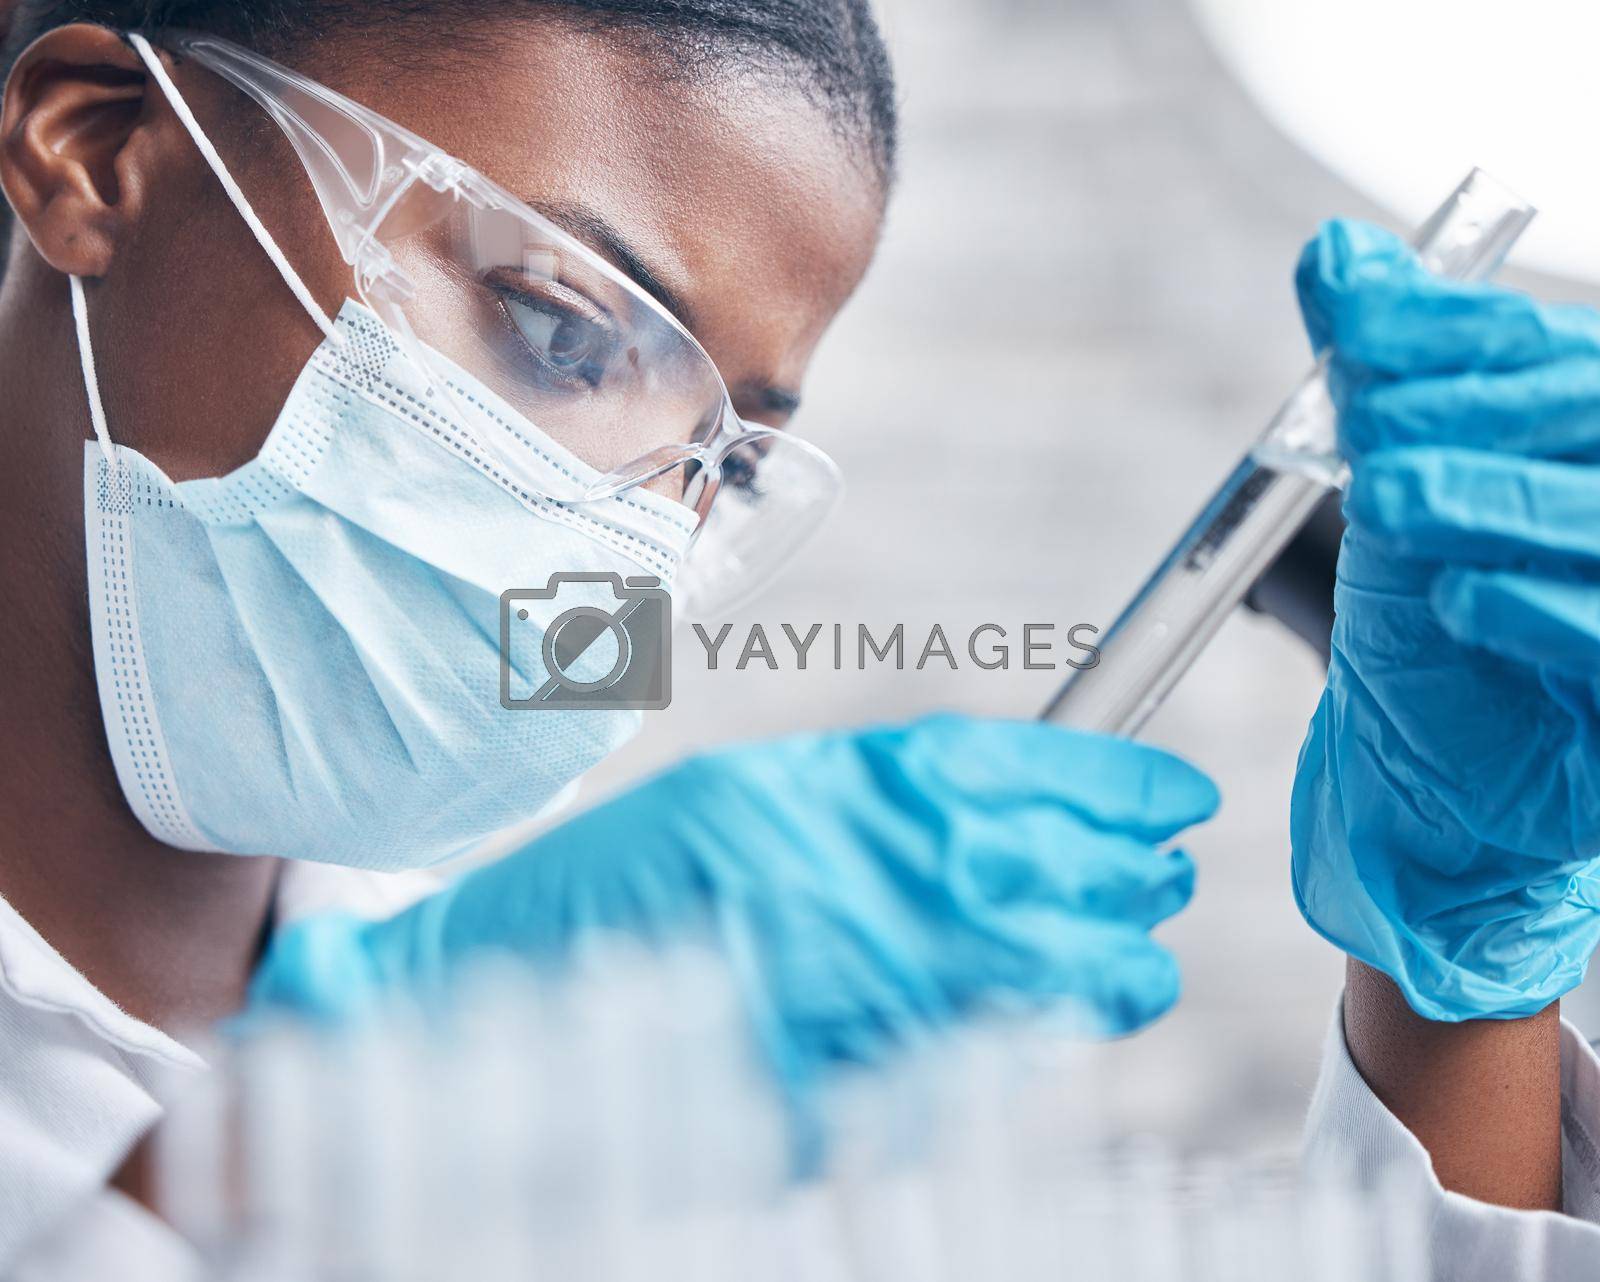 Royalty free image of Scrutinising the sample at hand. a young scientist working with test tubes in a lab. by YuriArcurs